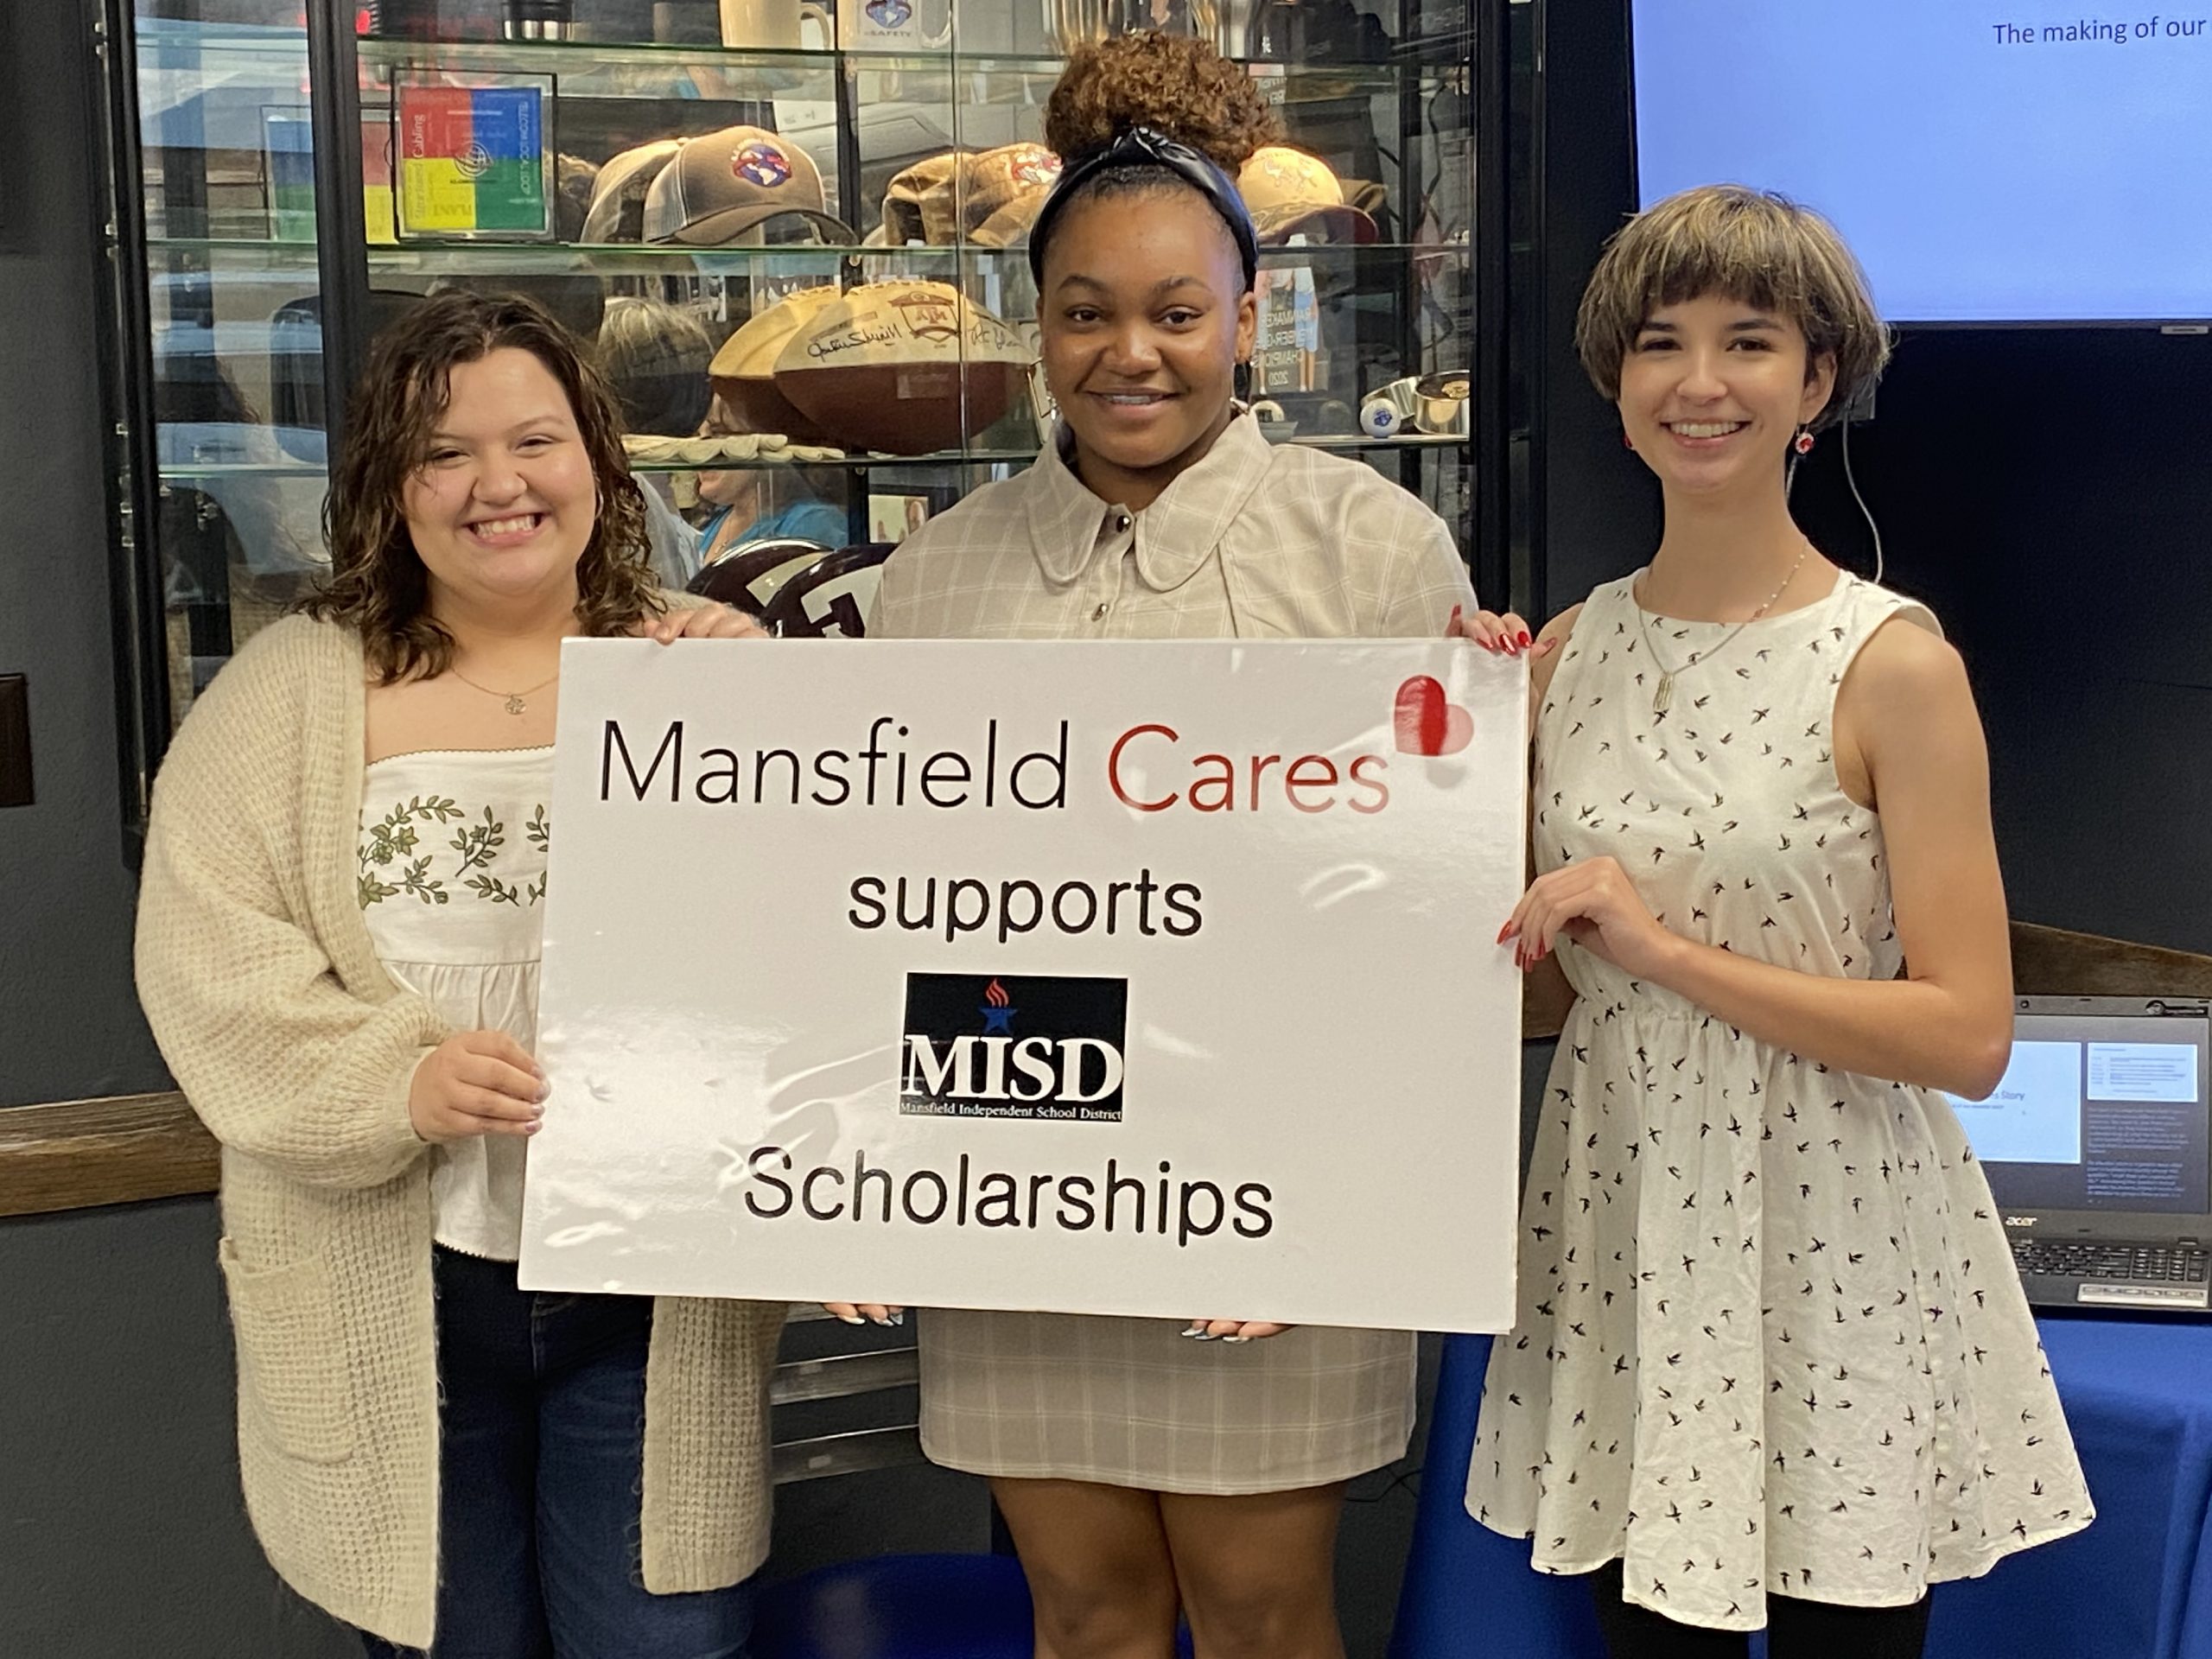 Mansfield Cares awards $16,500 in college scholarships